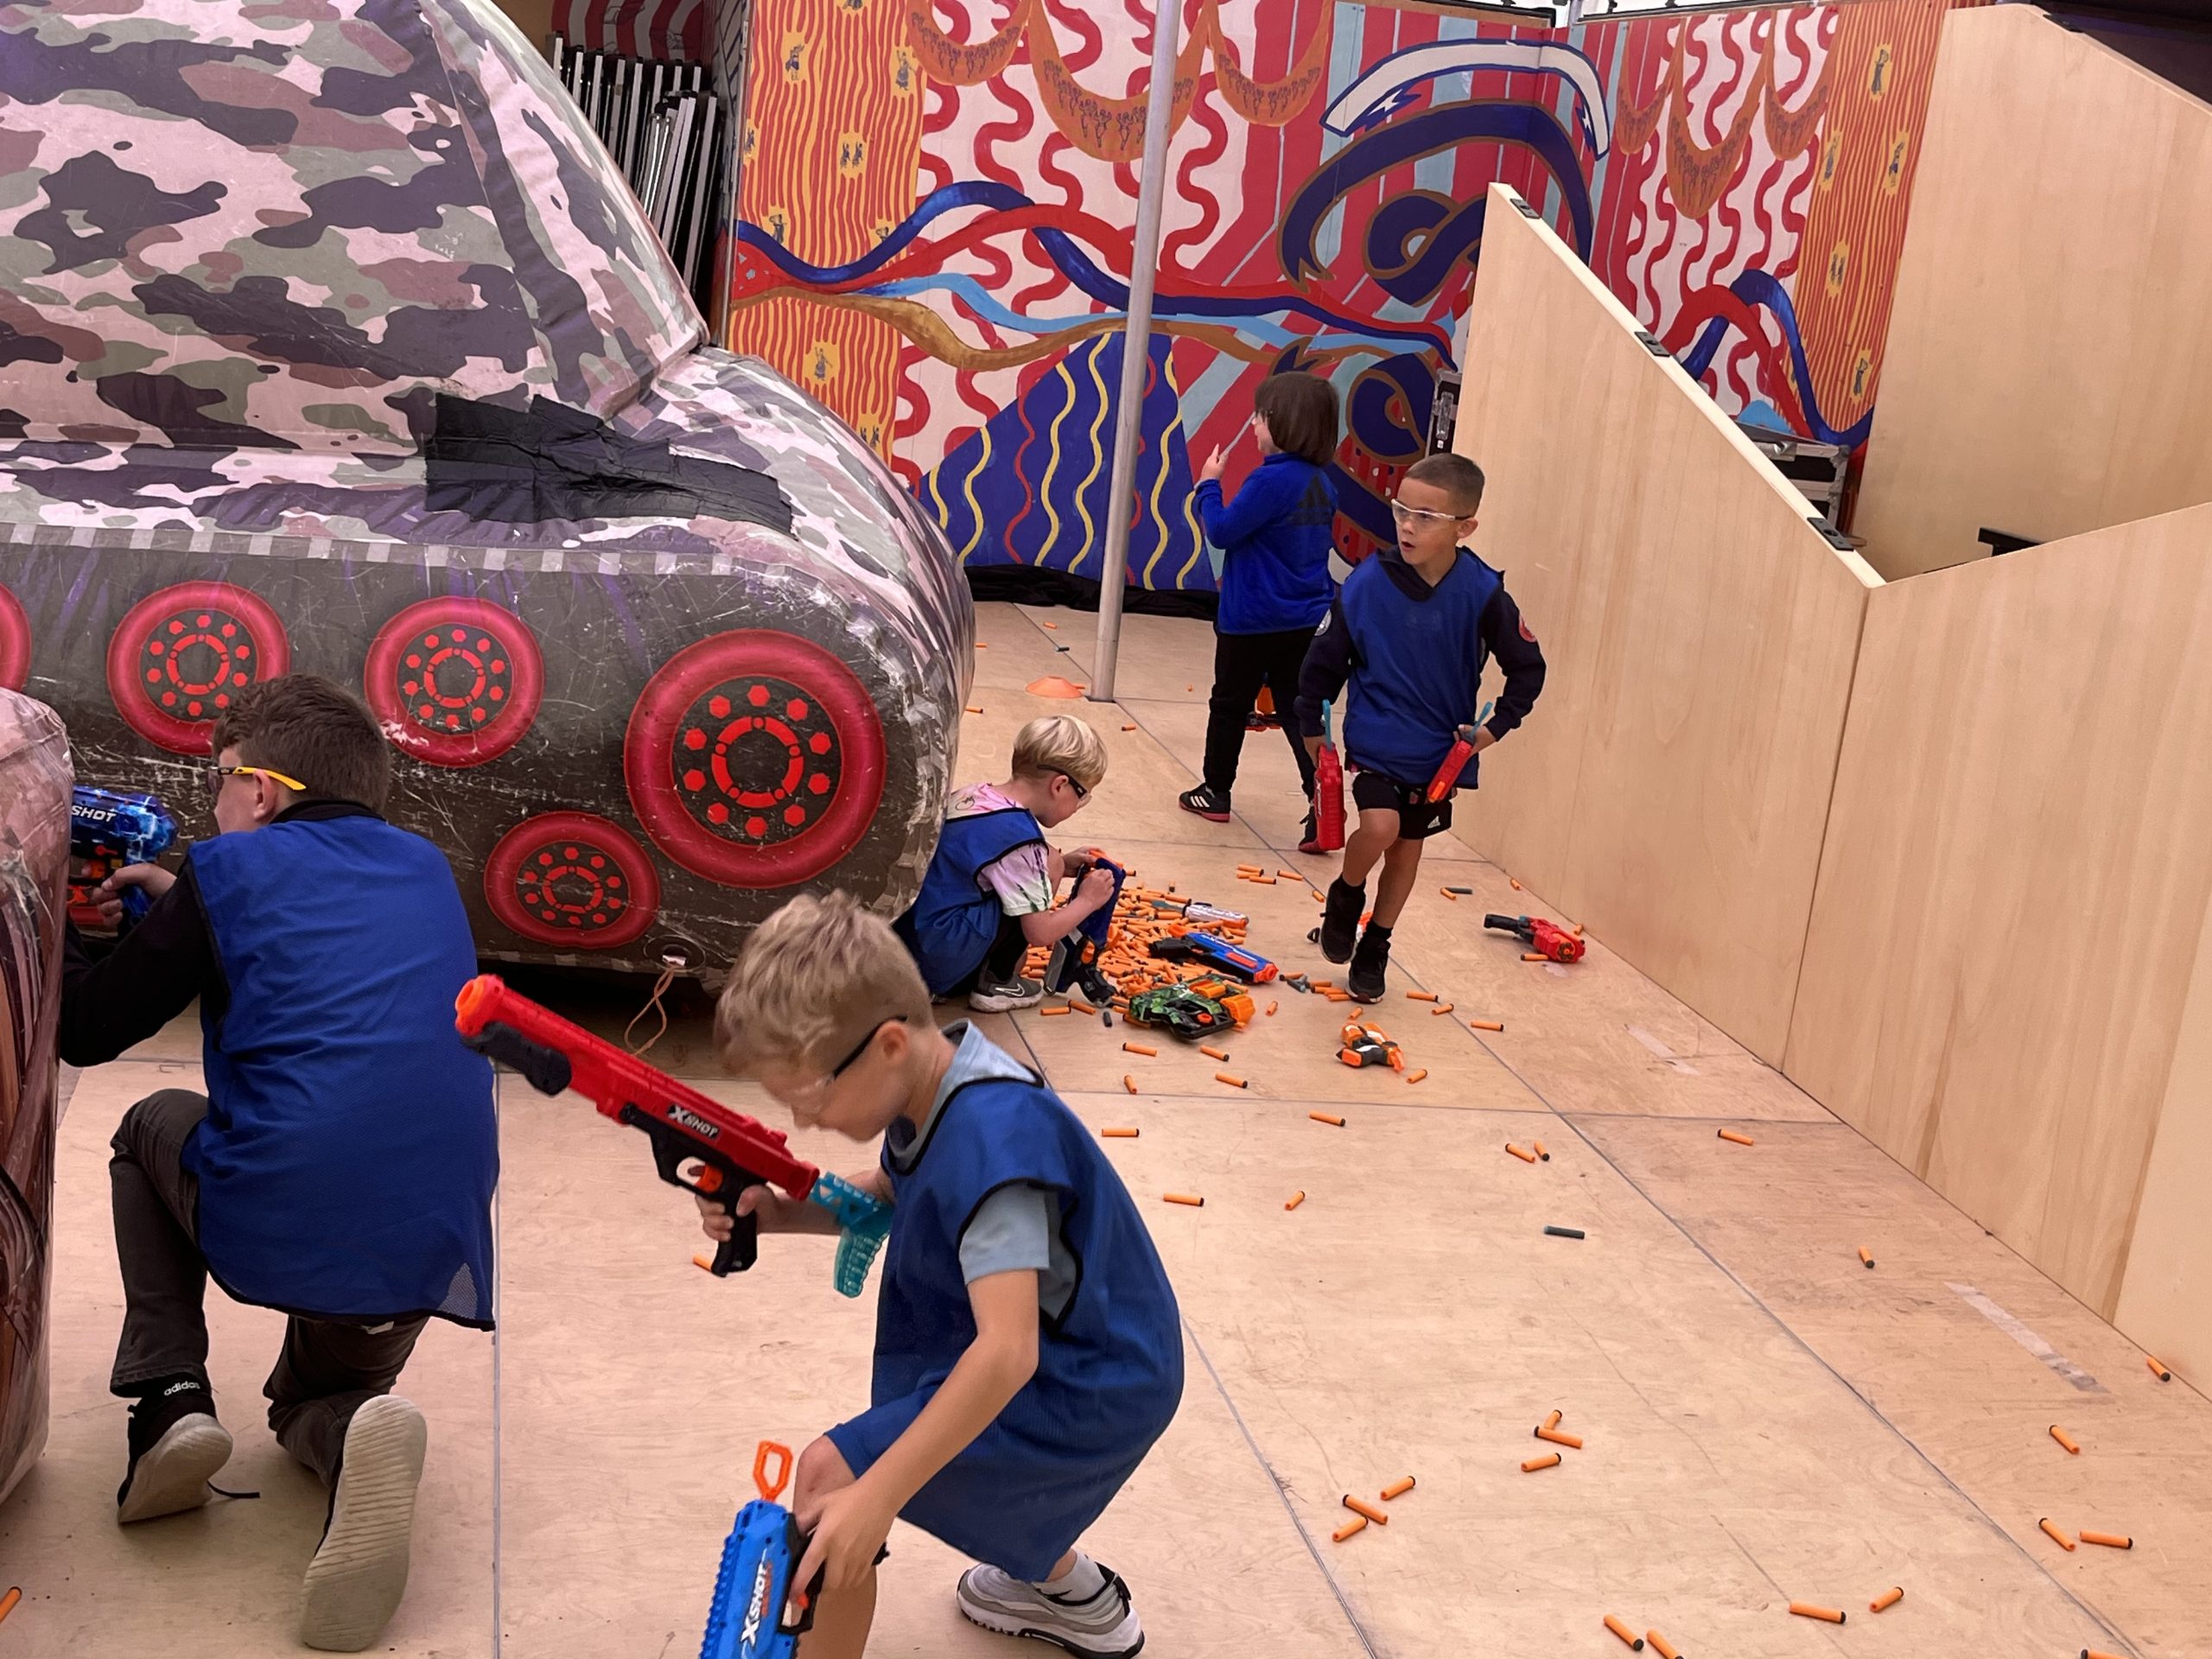 A photograph of a nerf party taking plac inside the MET. Several children playing with nerf guns and hiding behind inflatable obstacles.